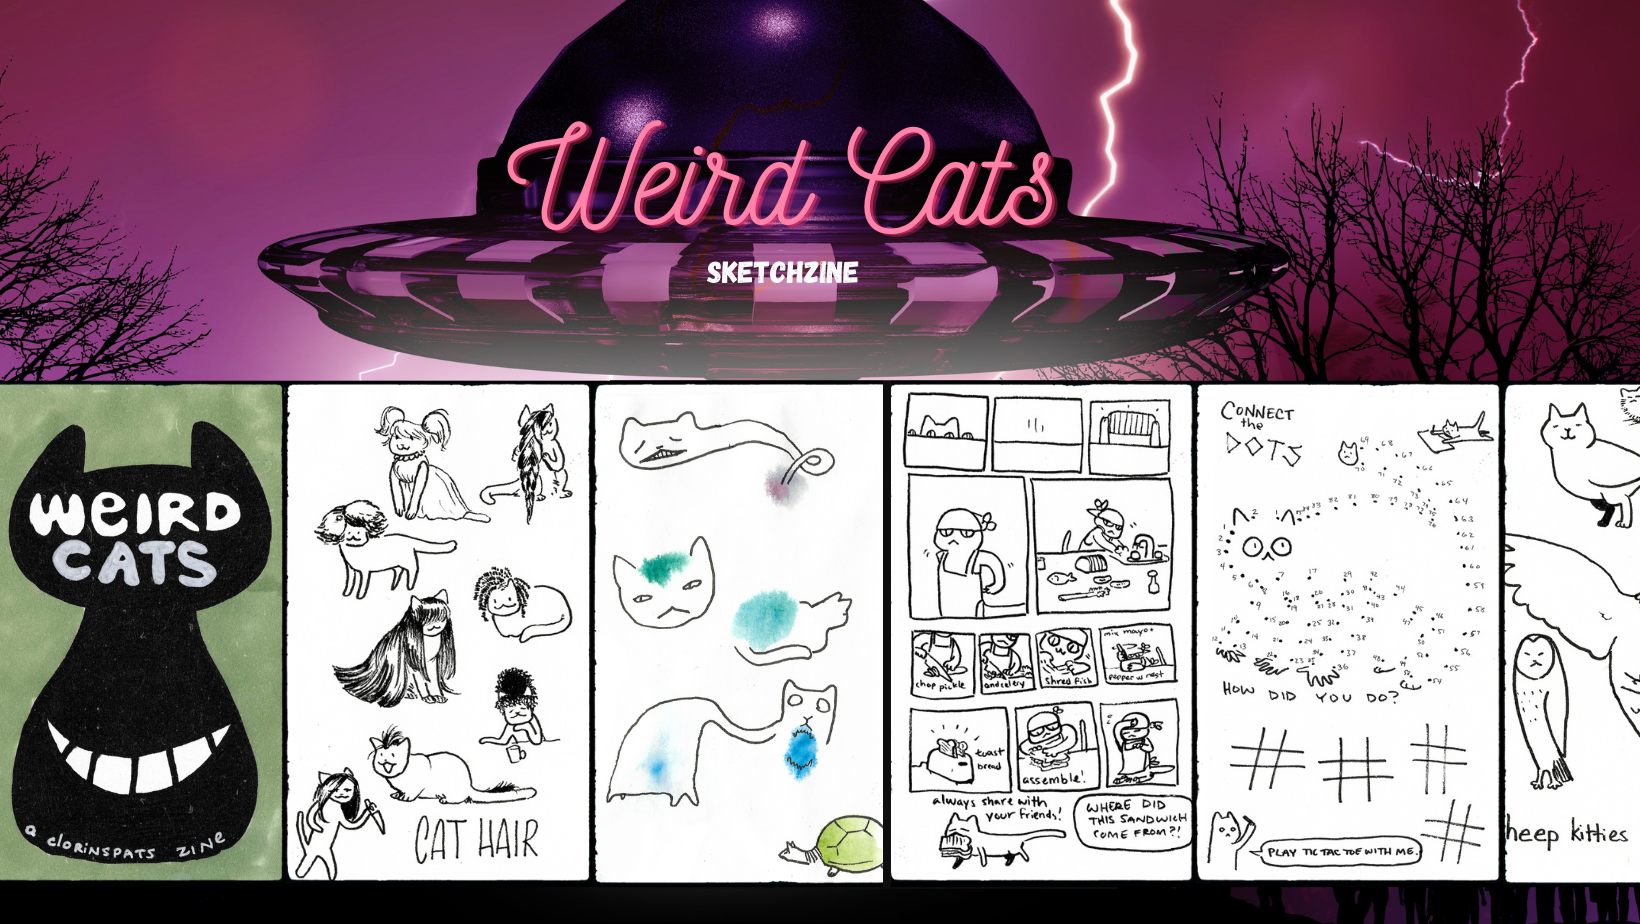 WEIRD CATS are out!!